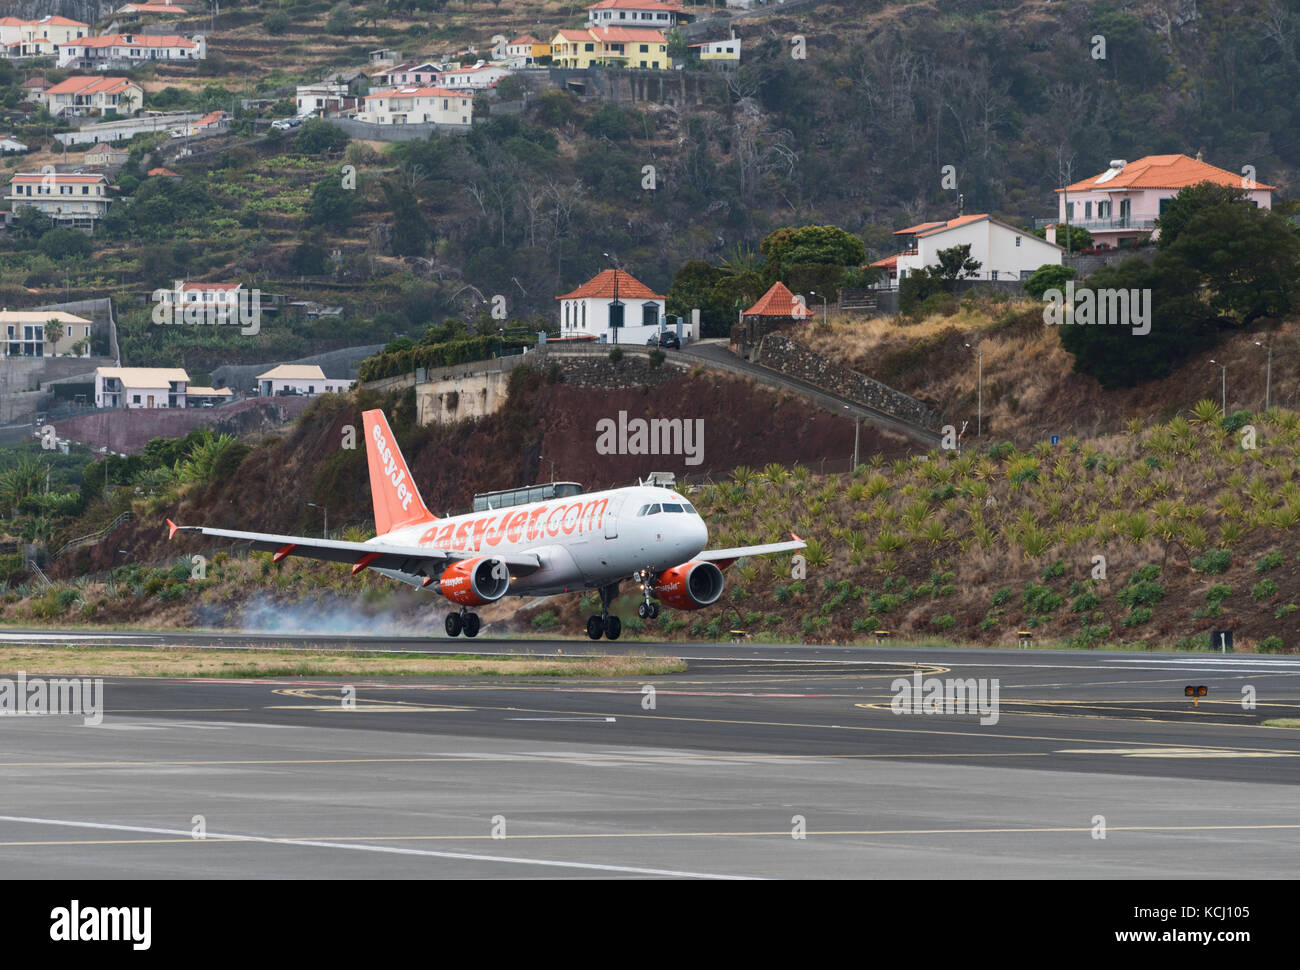 Easyjet Airbus A319 Registration G-EZBD touches down at Cristiano Ronaldo International Airport in Madeira Stock Photo